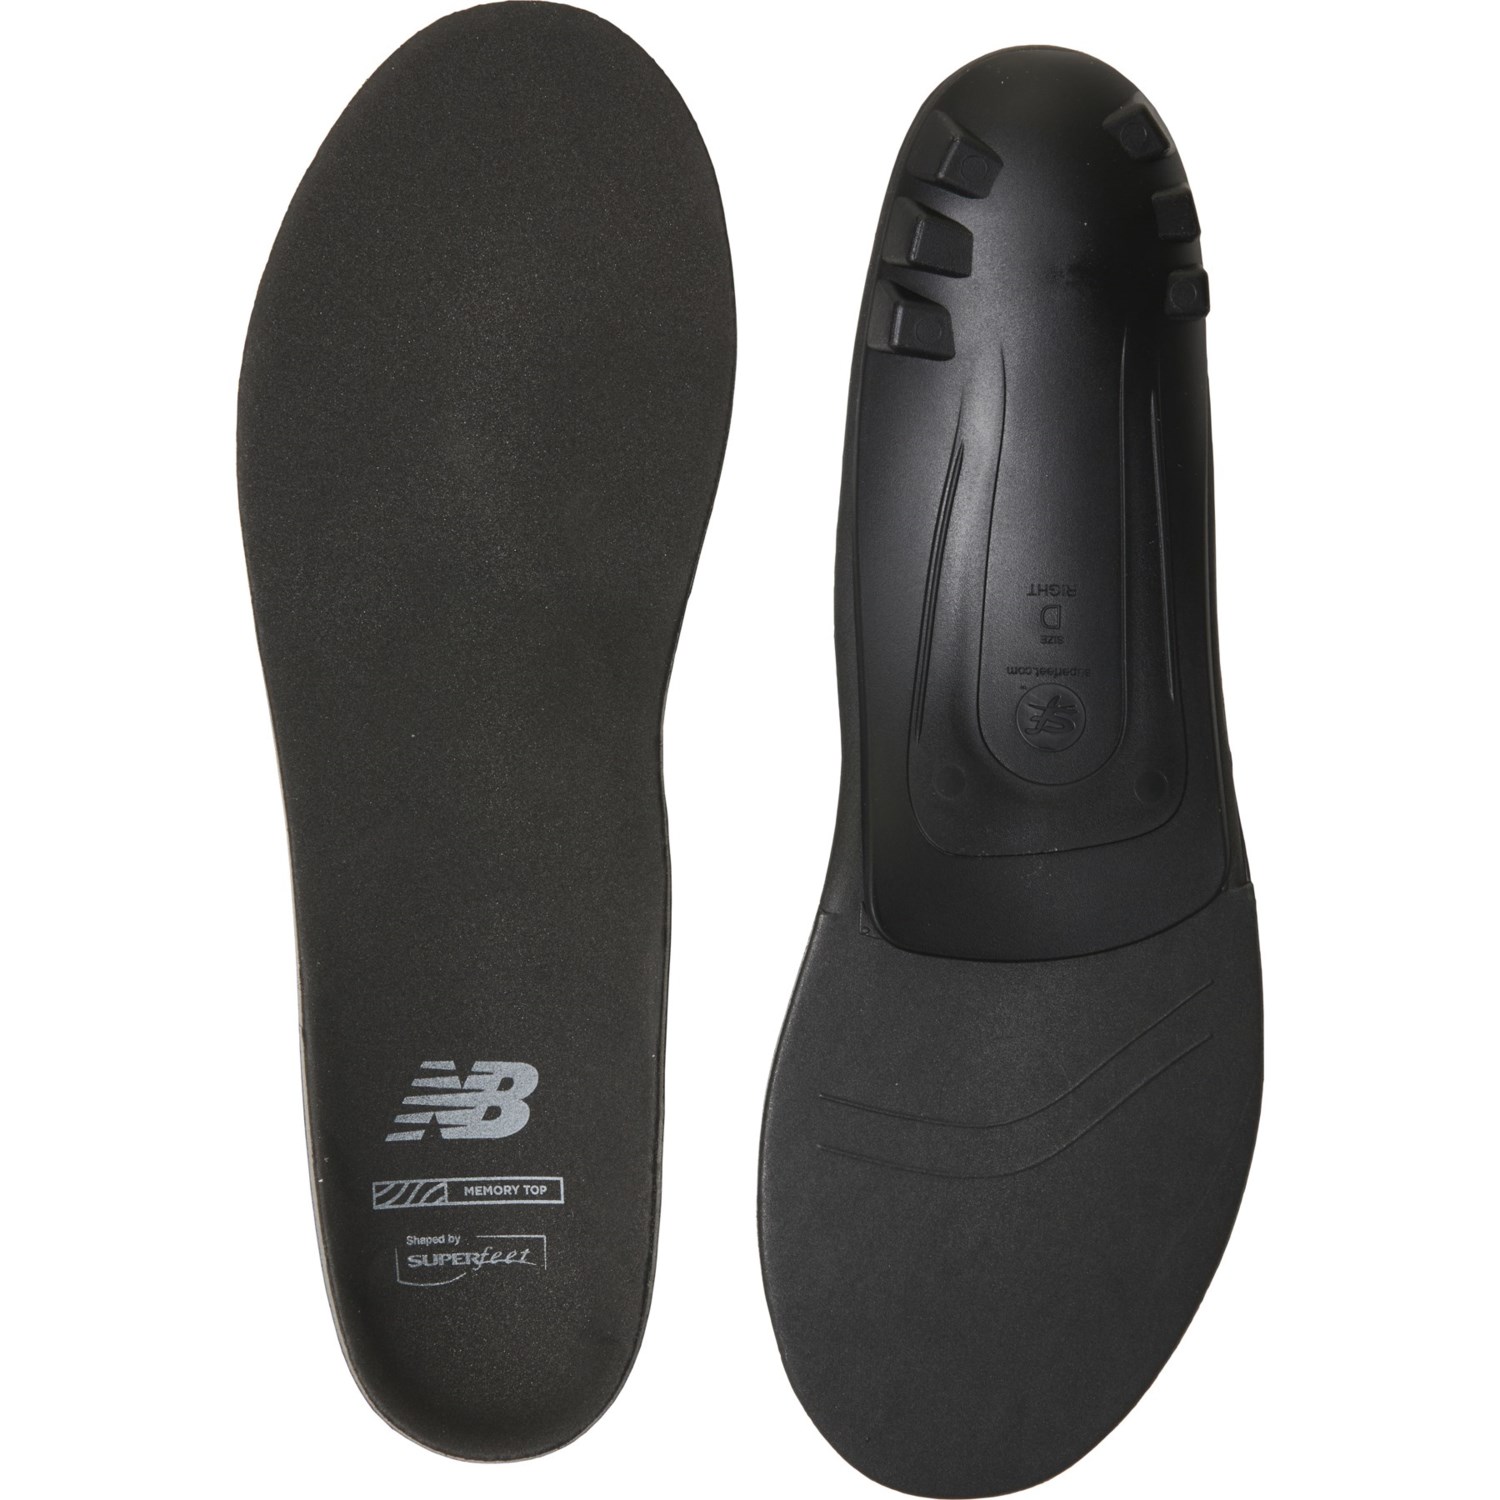 New Balance by Superfeet Memory Top Insole Inserts (For Men and Women)